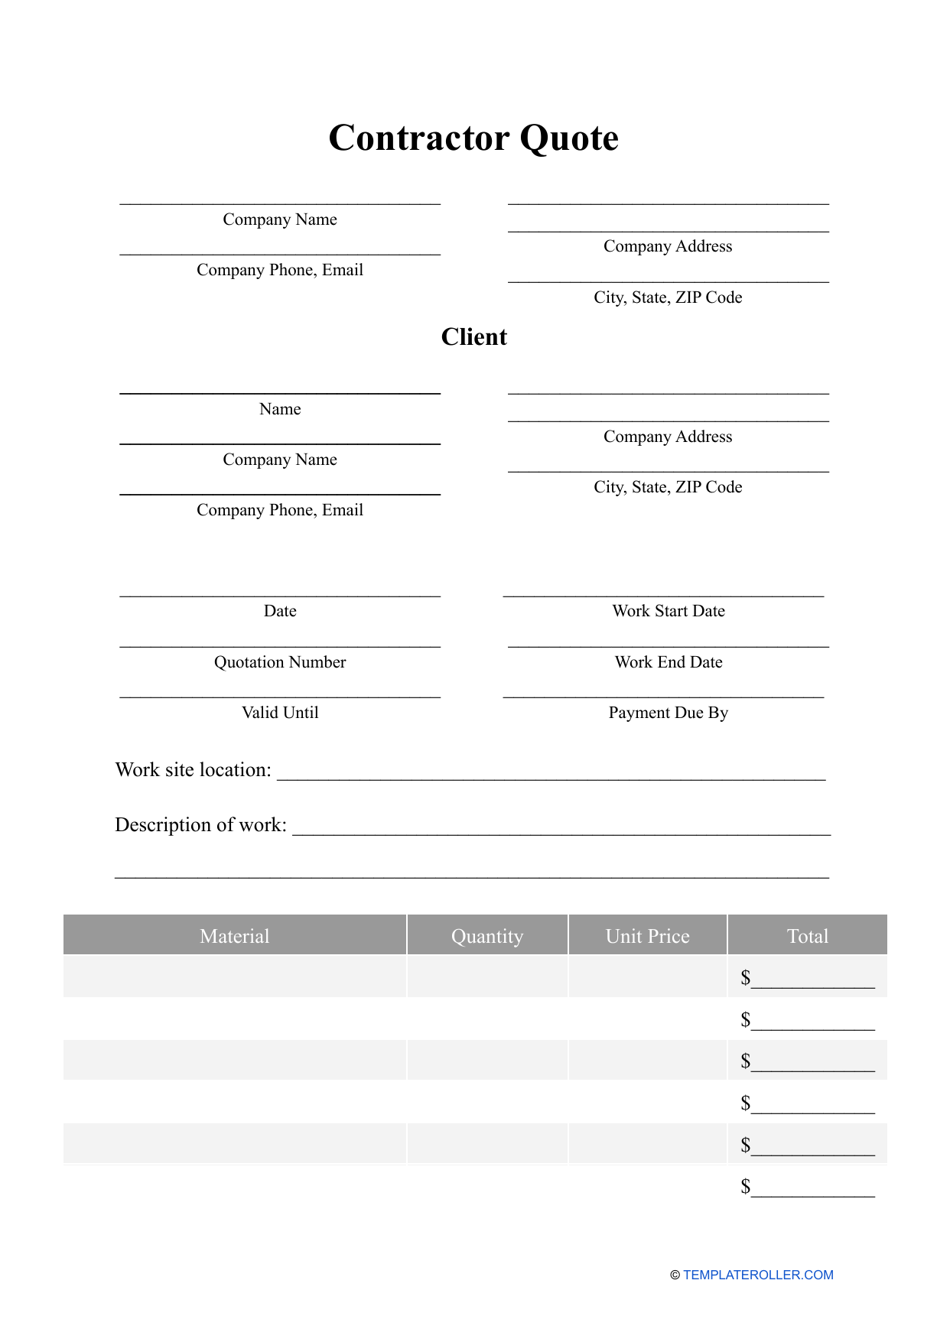 Contractor Quote Template, Page 1